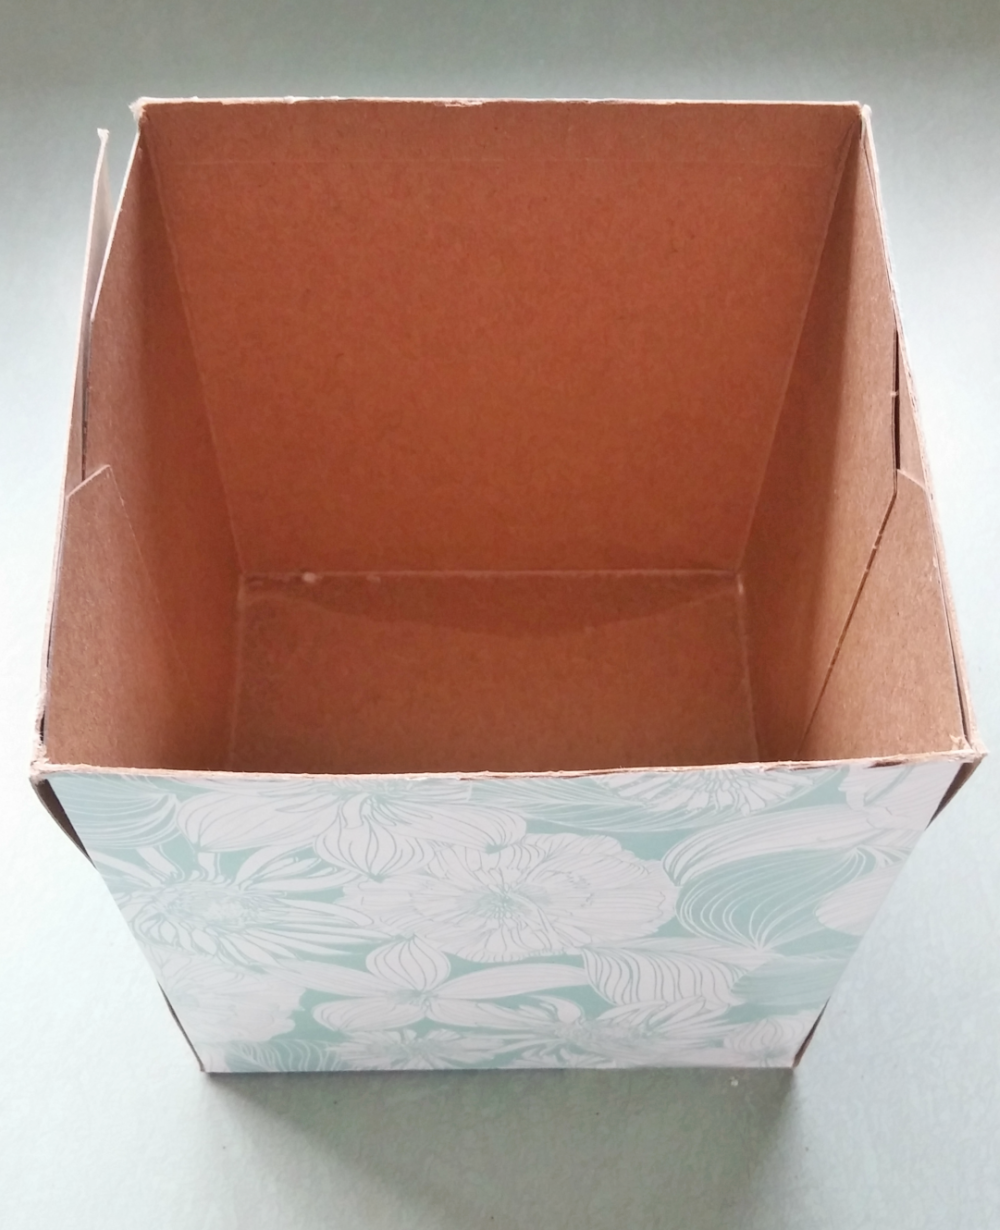 tissue box with top cut off